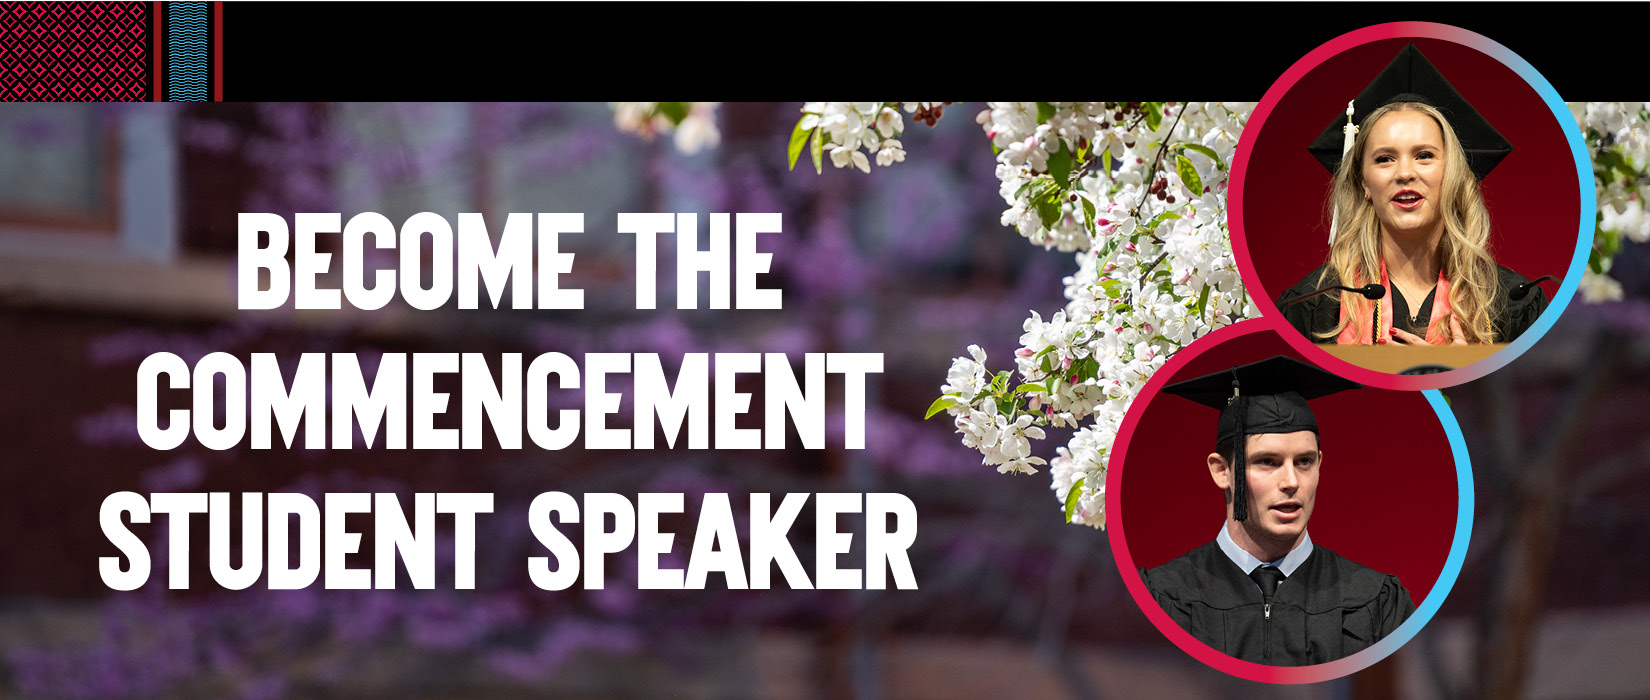 Become the commencement student speaker